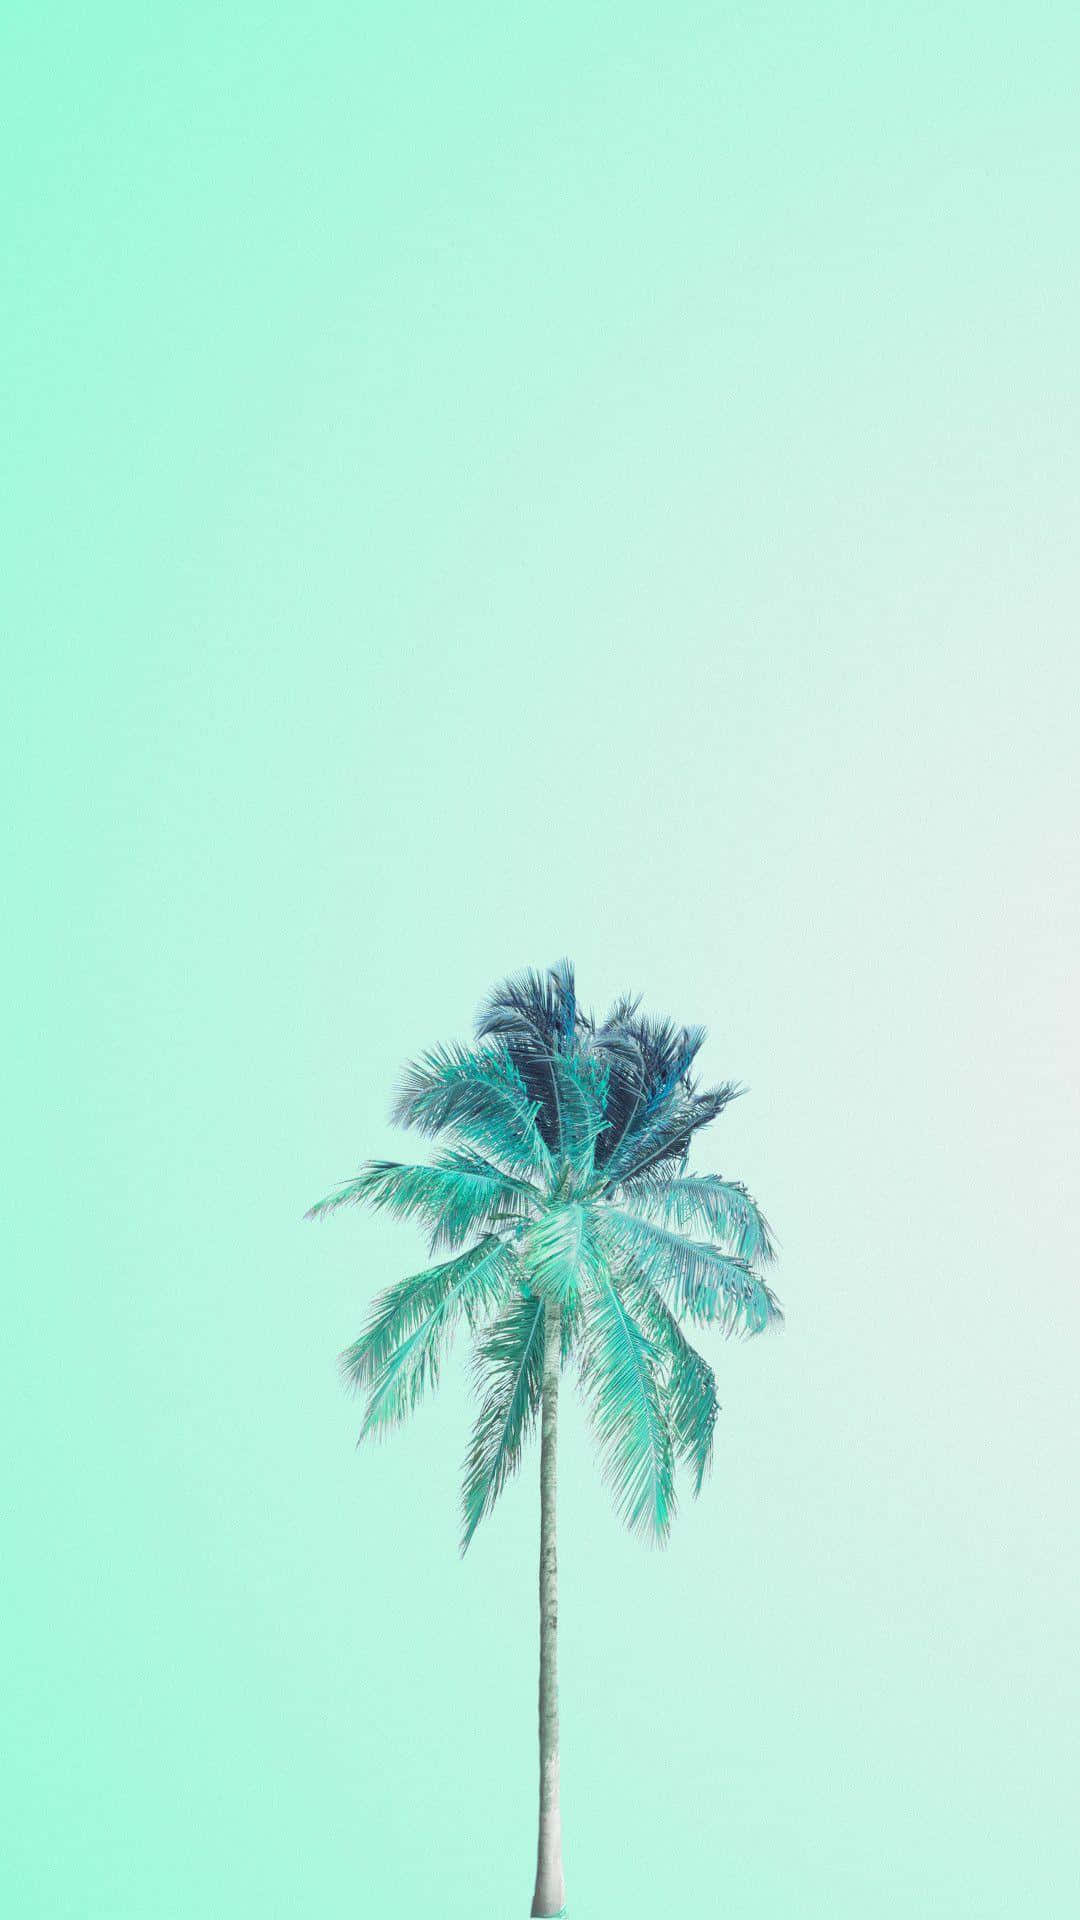 A Palm Tree On A Turquoise Background